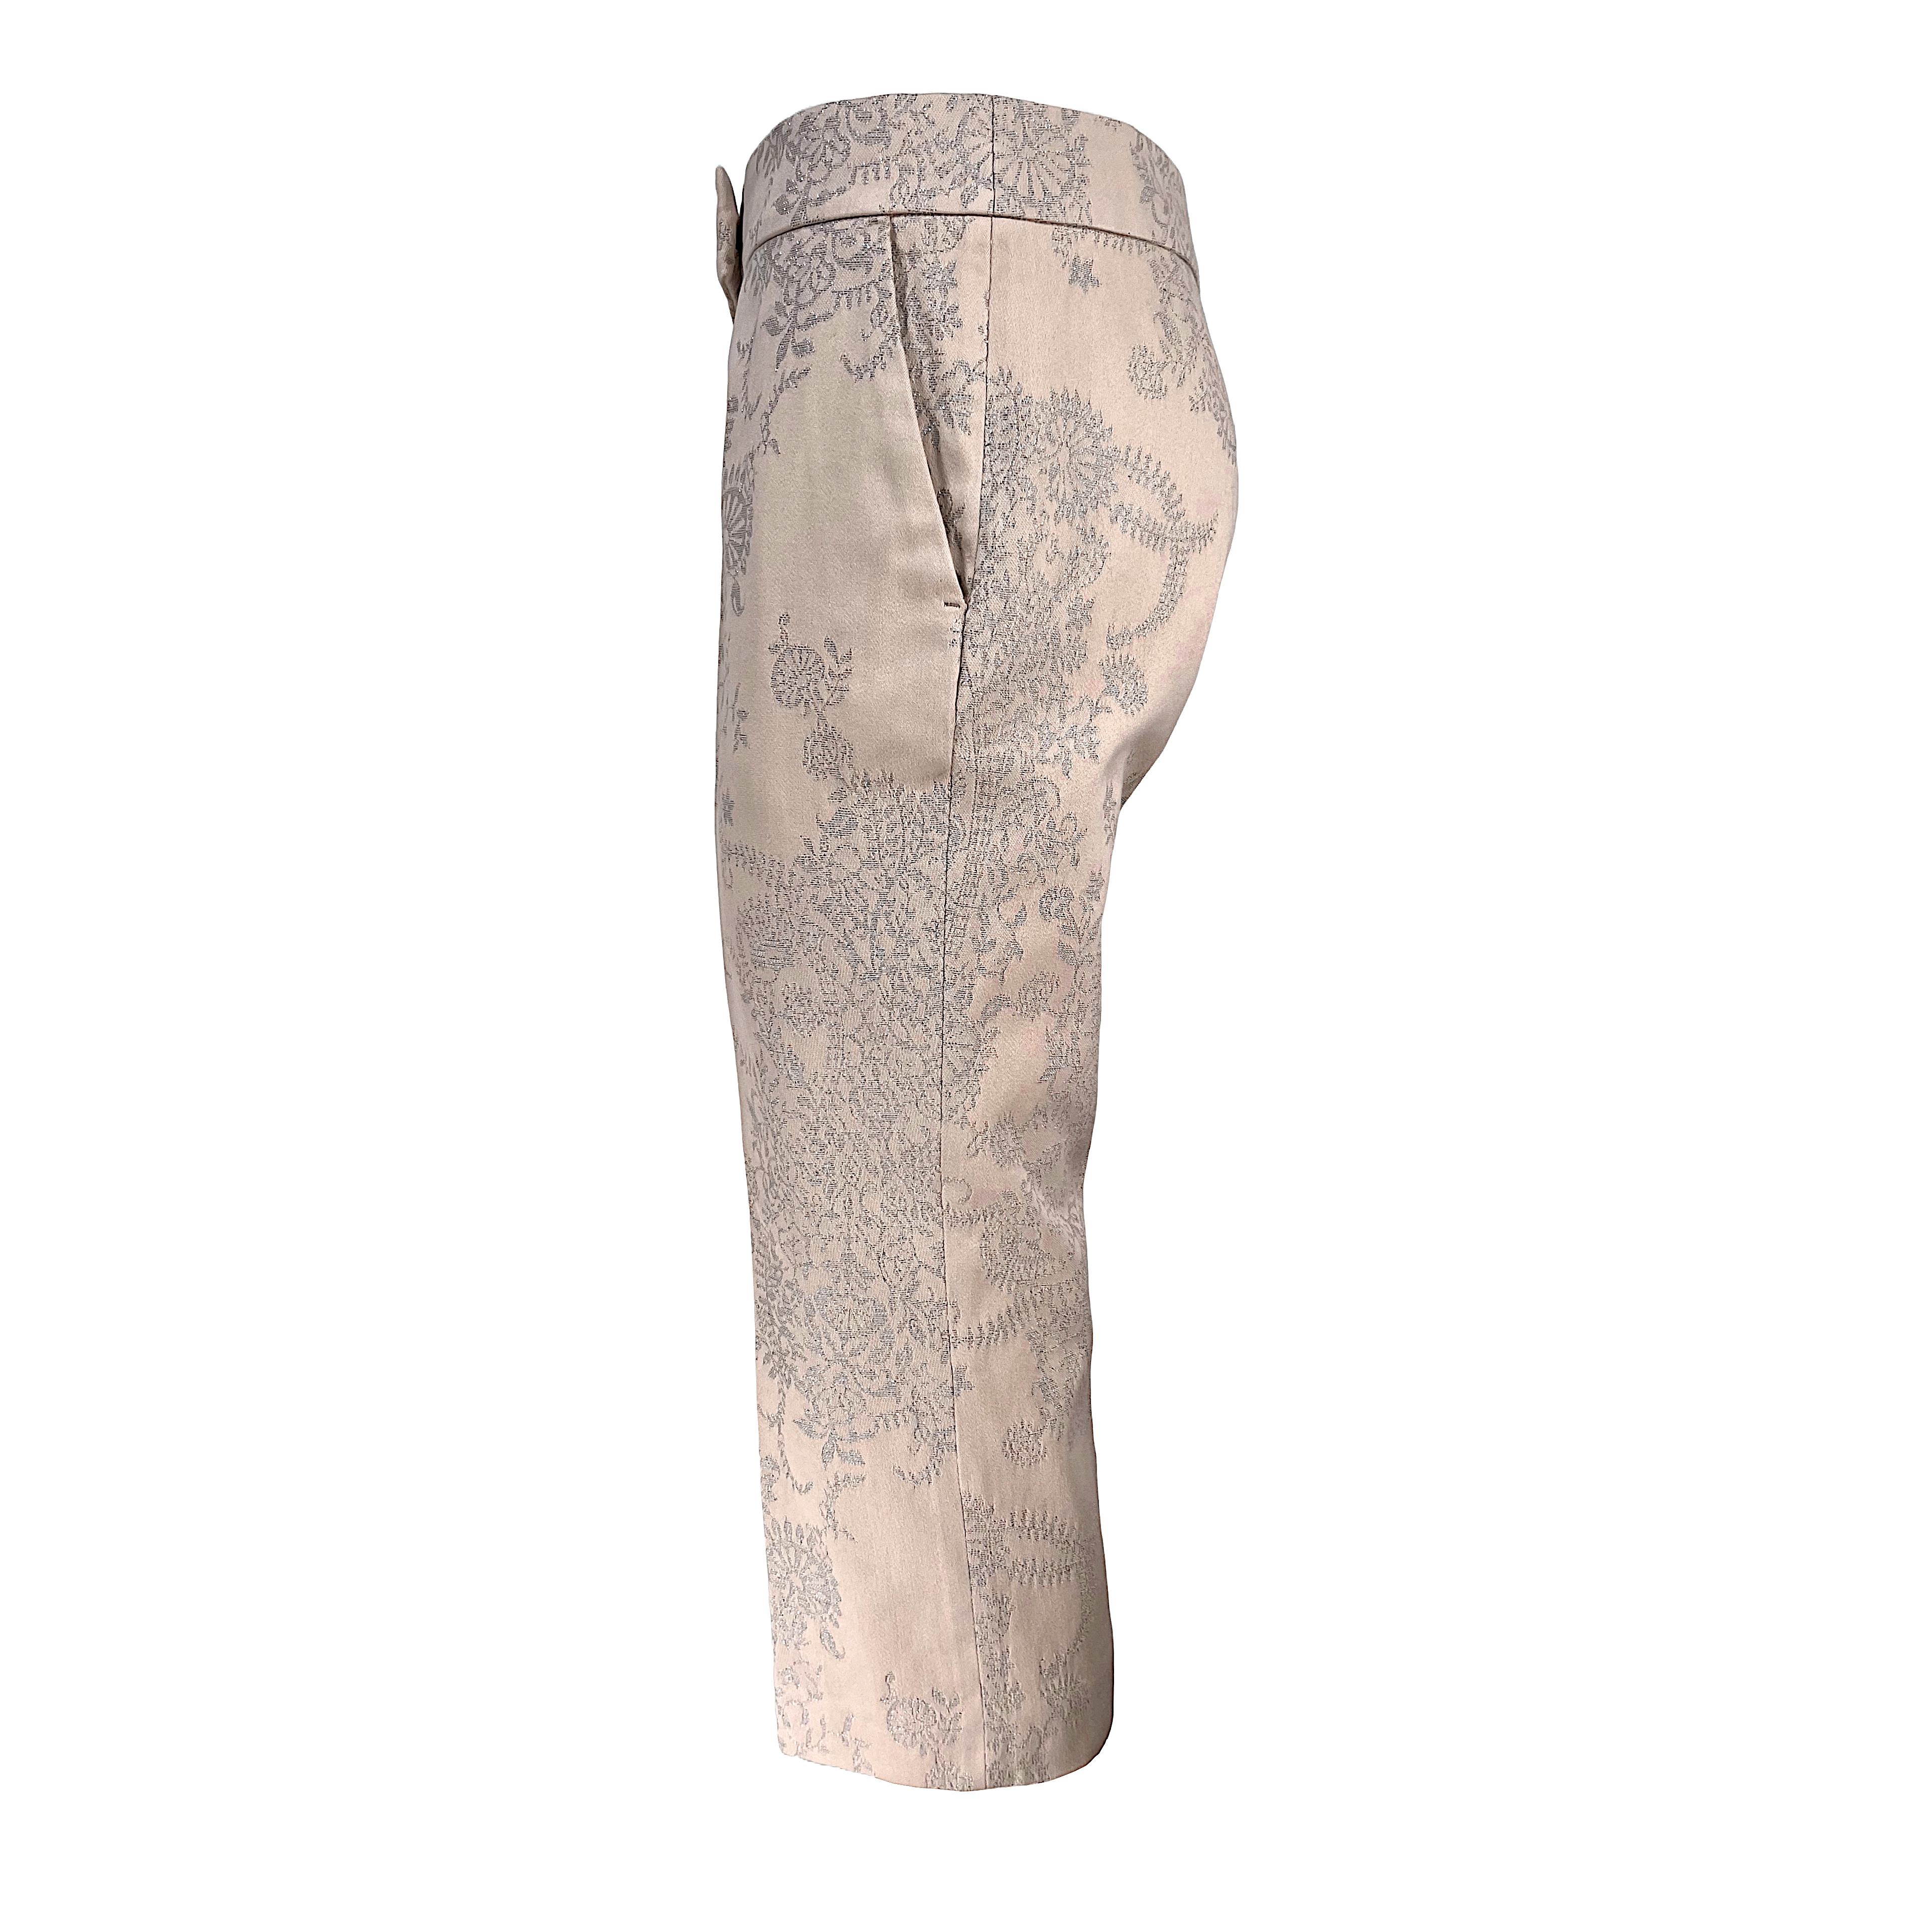 These Vintage Alexander McQueen Capri pants are a stunning addition to your wardrobe. They are crafted from rose-colored cotton jacquard fabric that boasts an intricate silver thread embroidery, creating a luxurious and eye-catching design. The 7/8